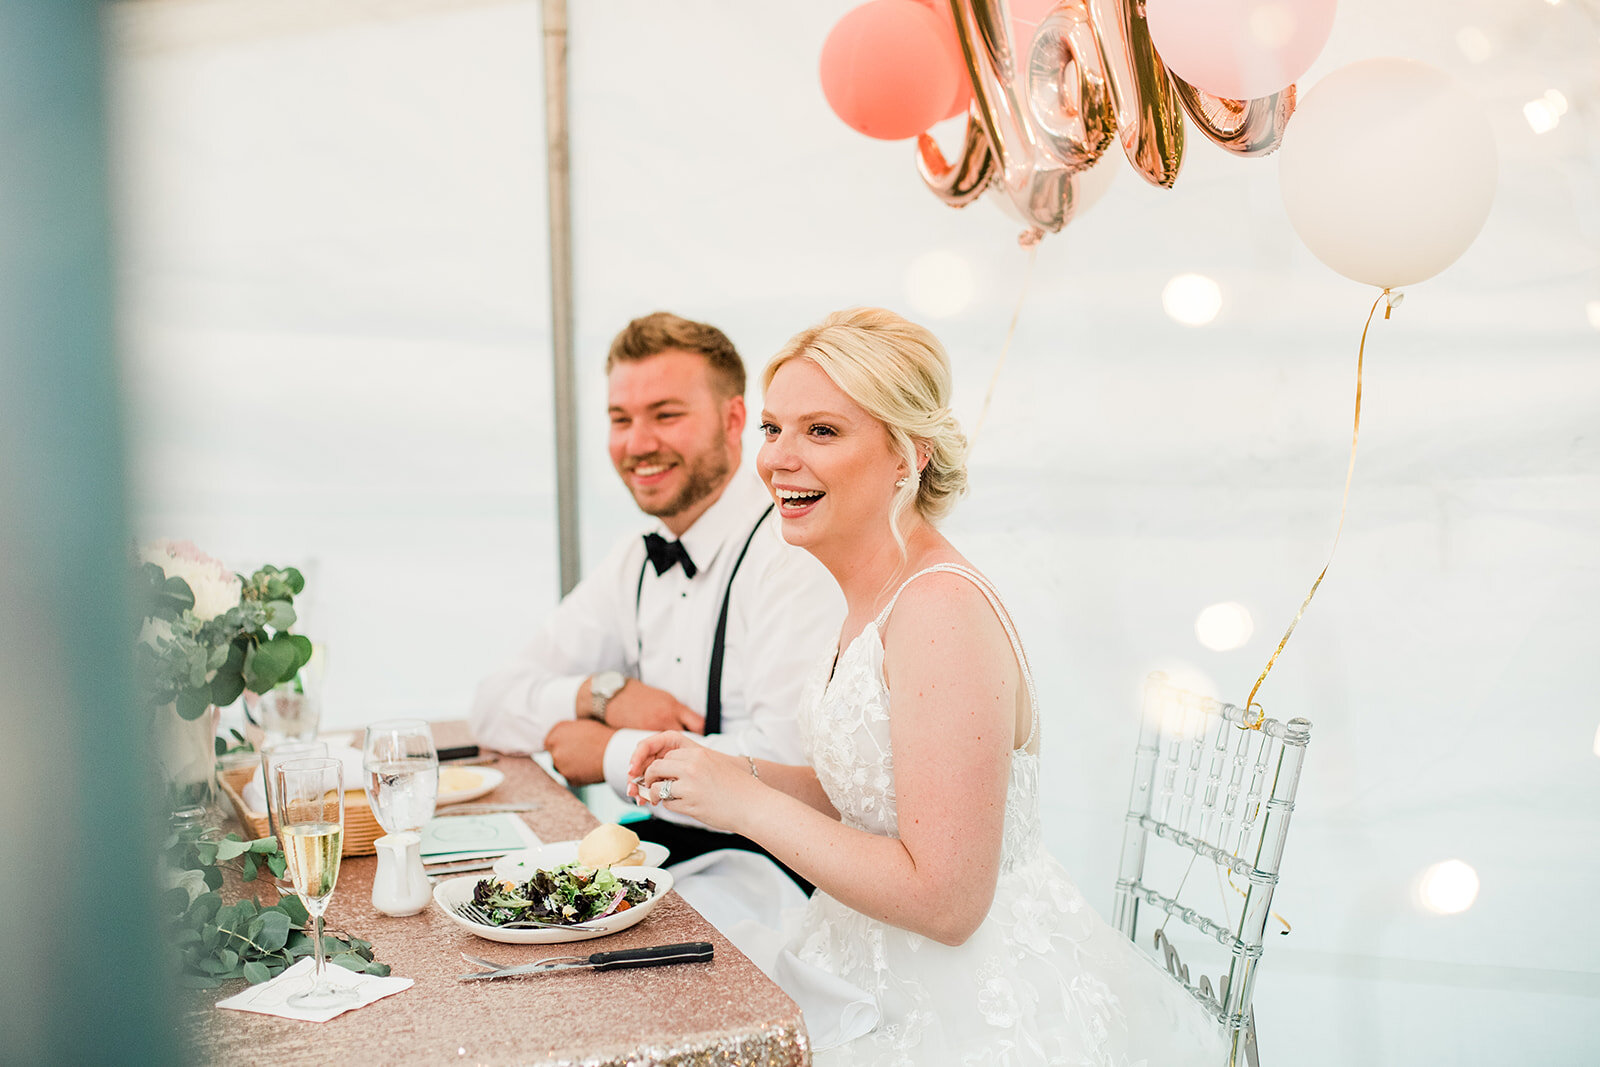 Romantic Industrial Summer Wedding Filled with Peonies in Sycamore Illinois captured by Expedition Joy